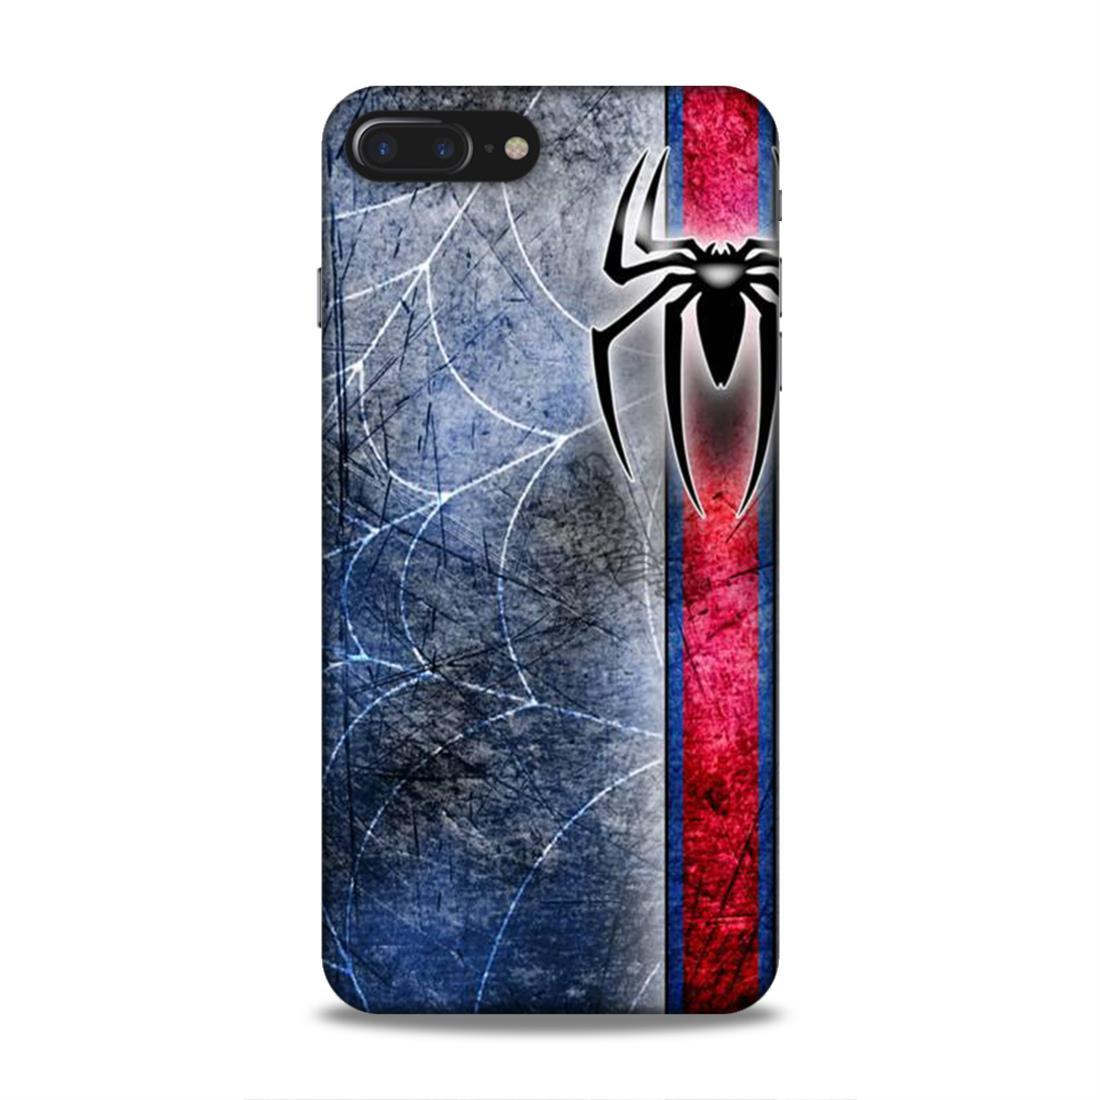 Spider Pattern iPhone 7 Plus Phone Back Cover